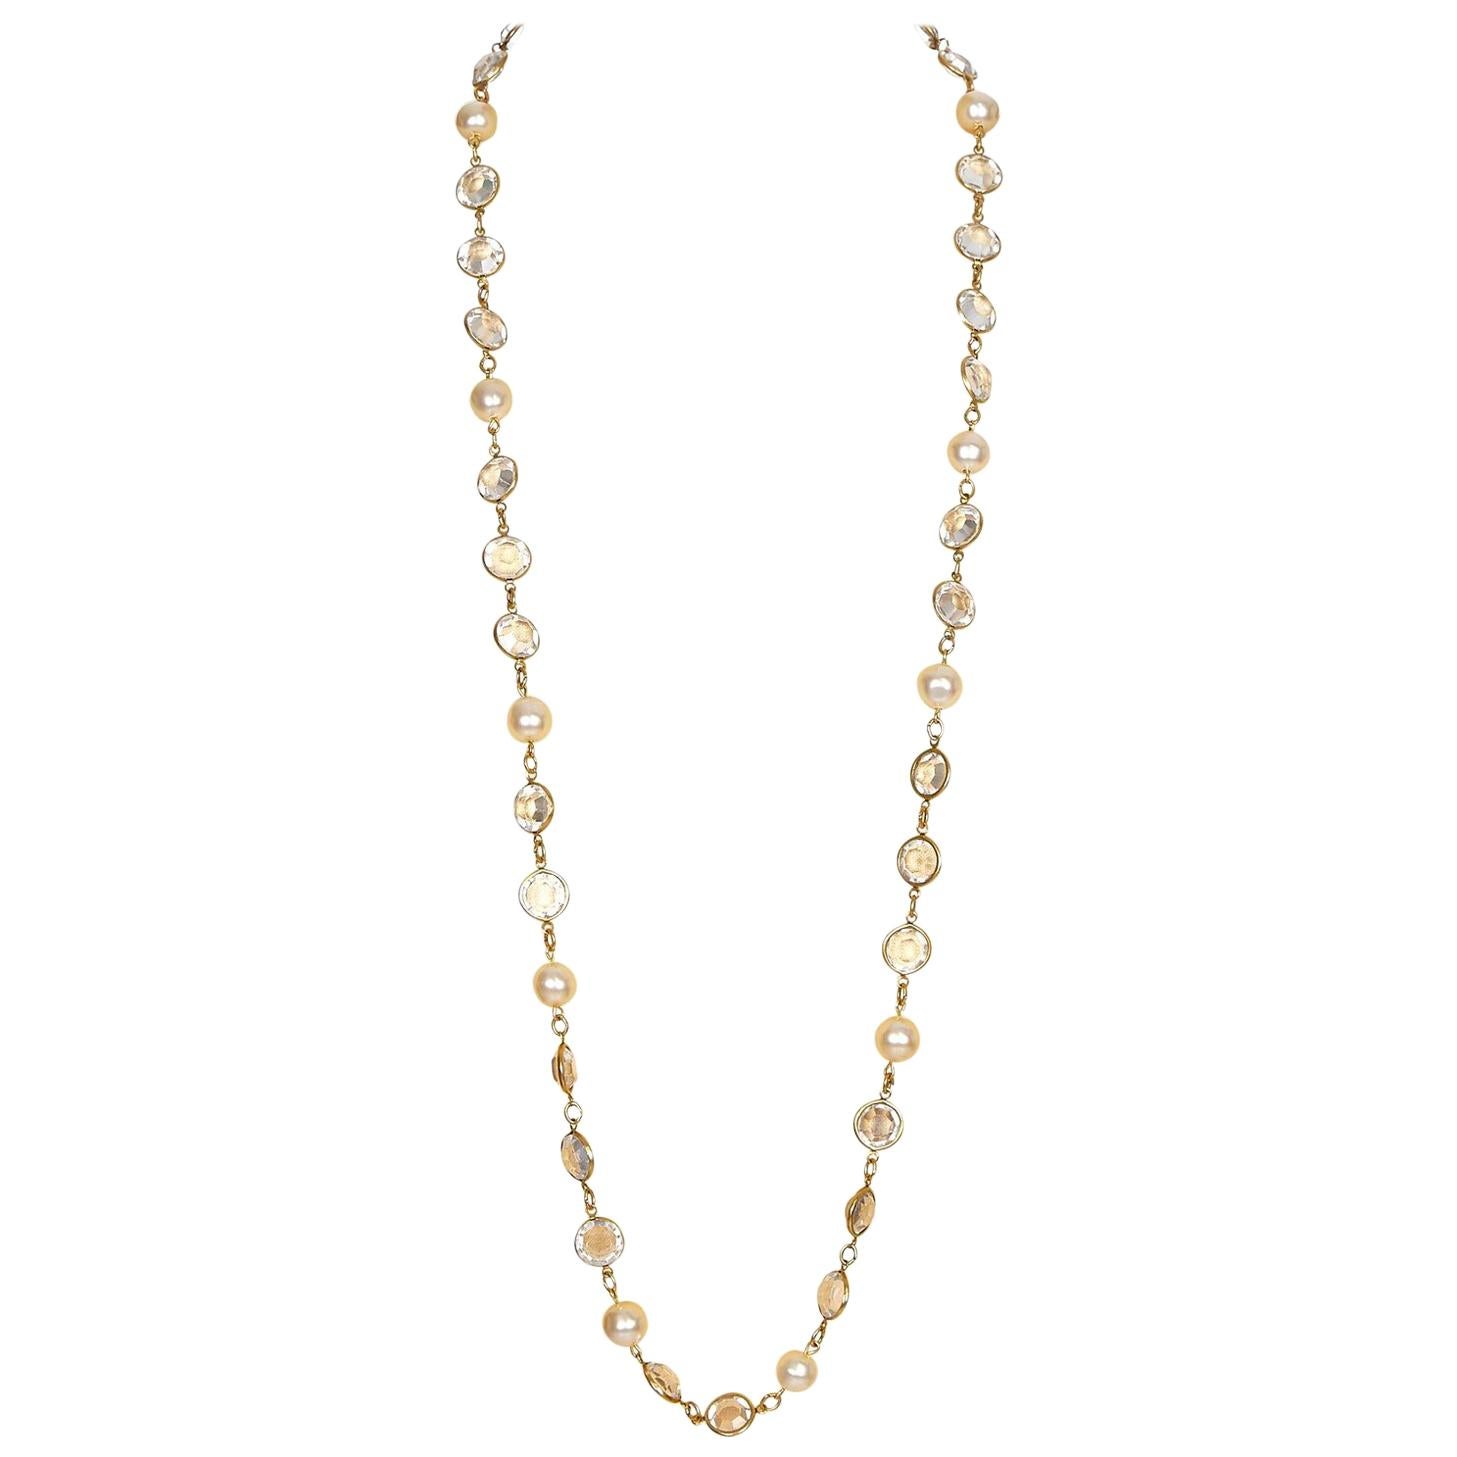 Chanel 1981 Gold Tone Crystal and Pearl Sautoir Necklace